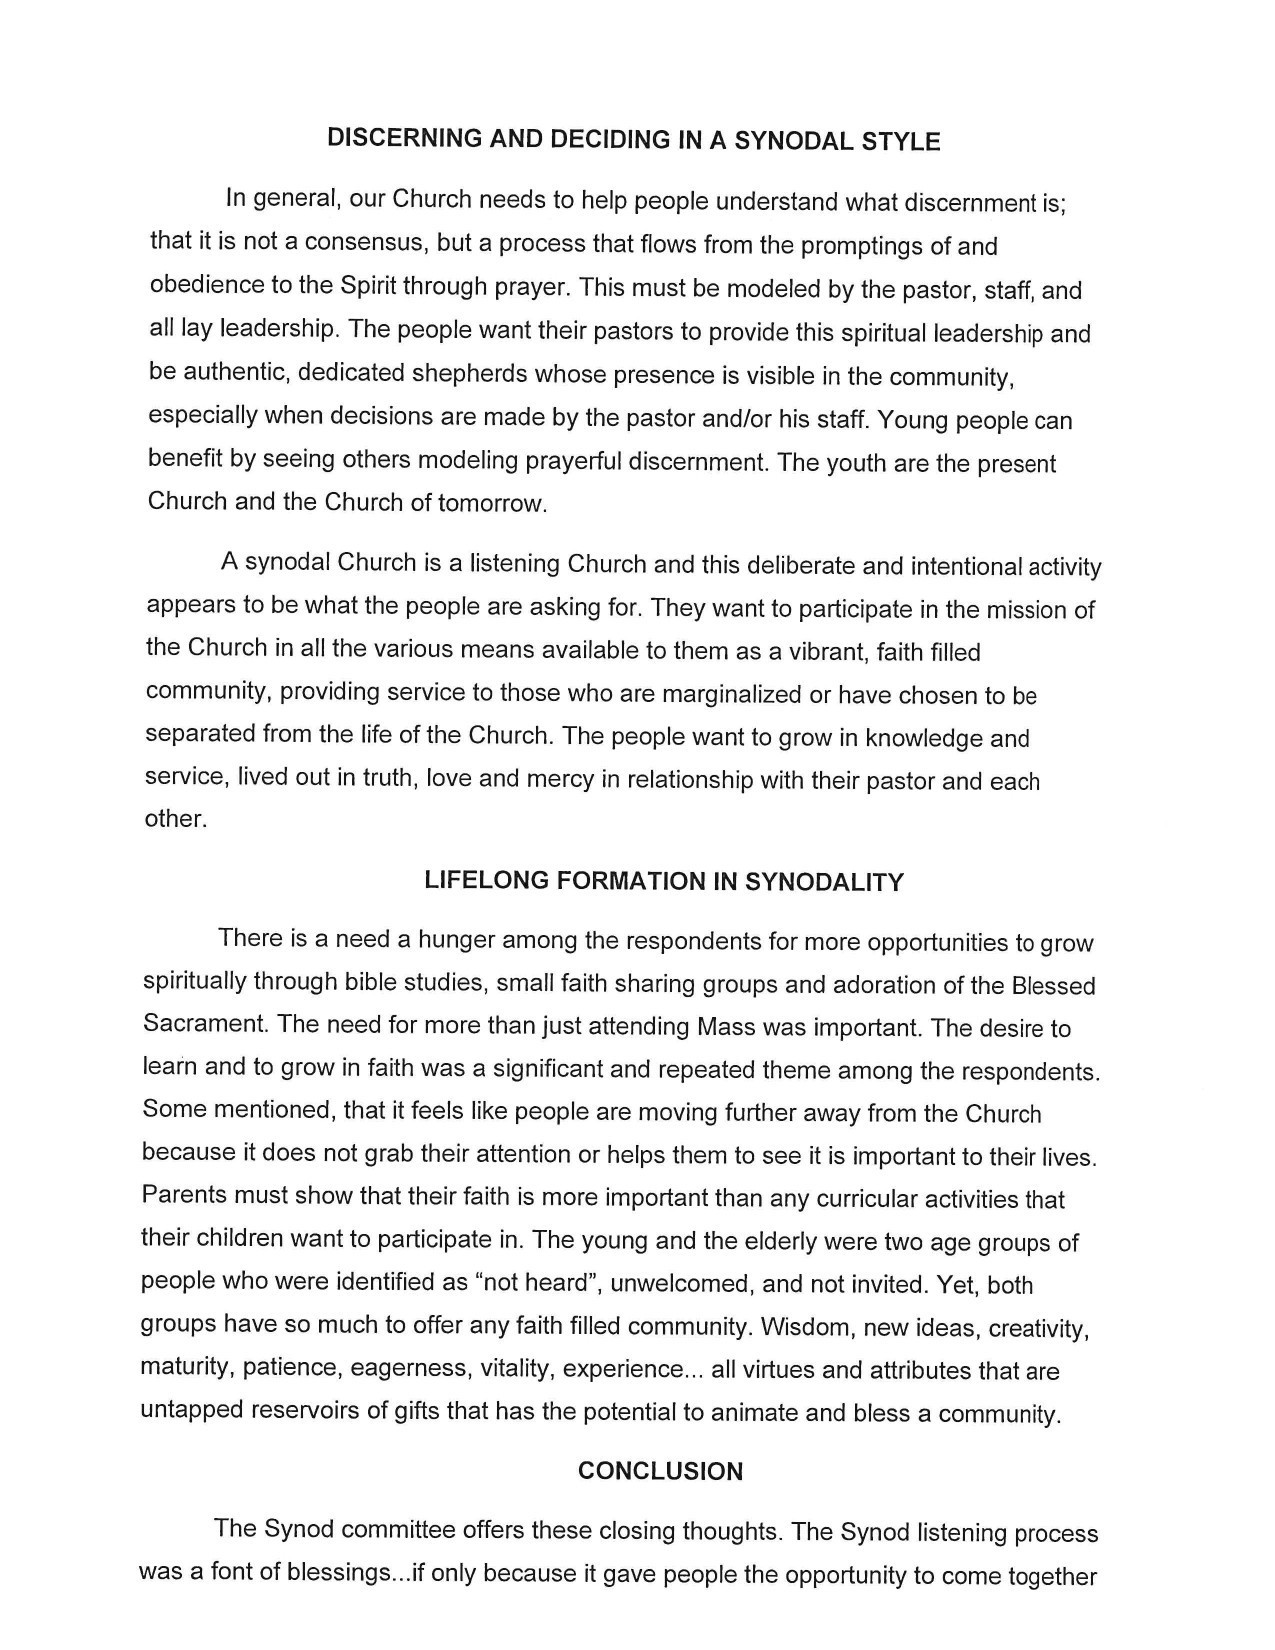 Diocese Of Fresno Final Report To Usccb 06.24.2022 1 Page 0009